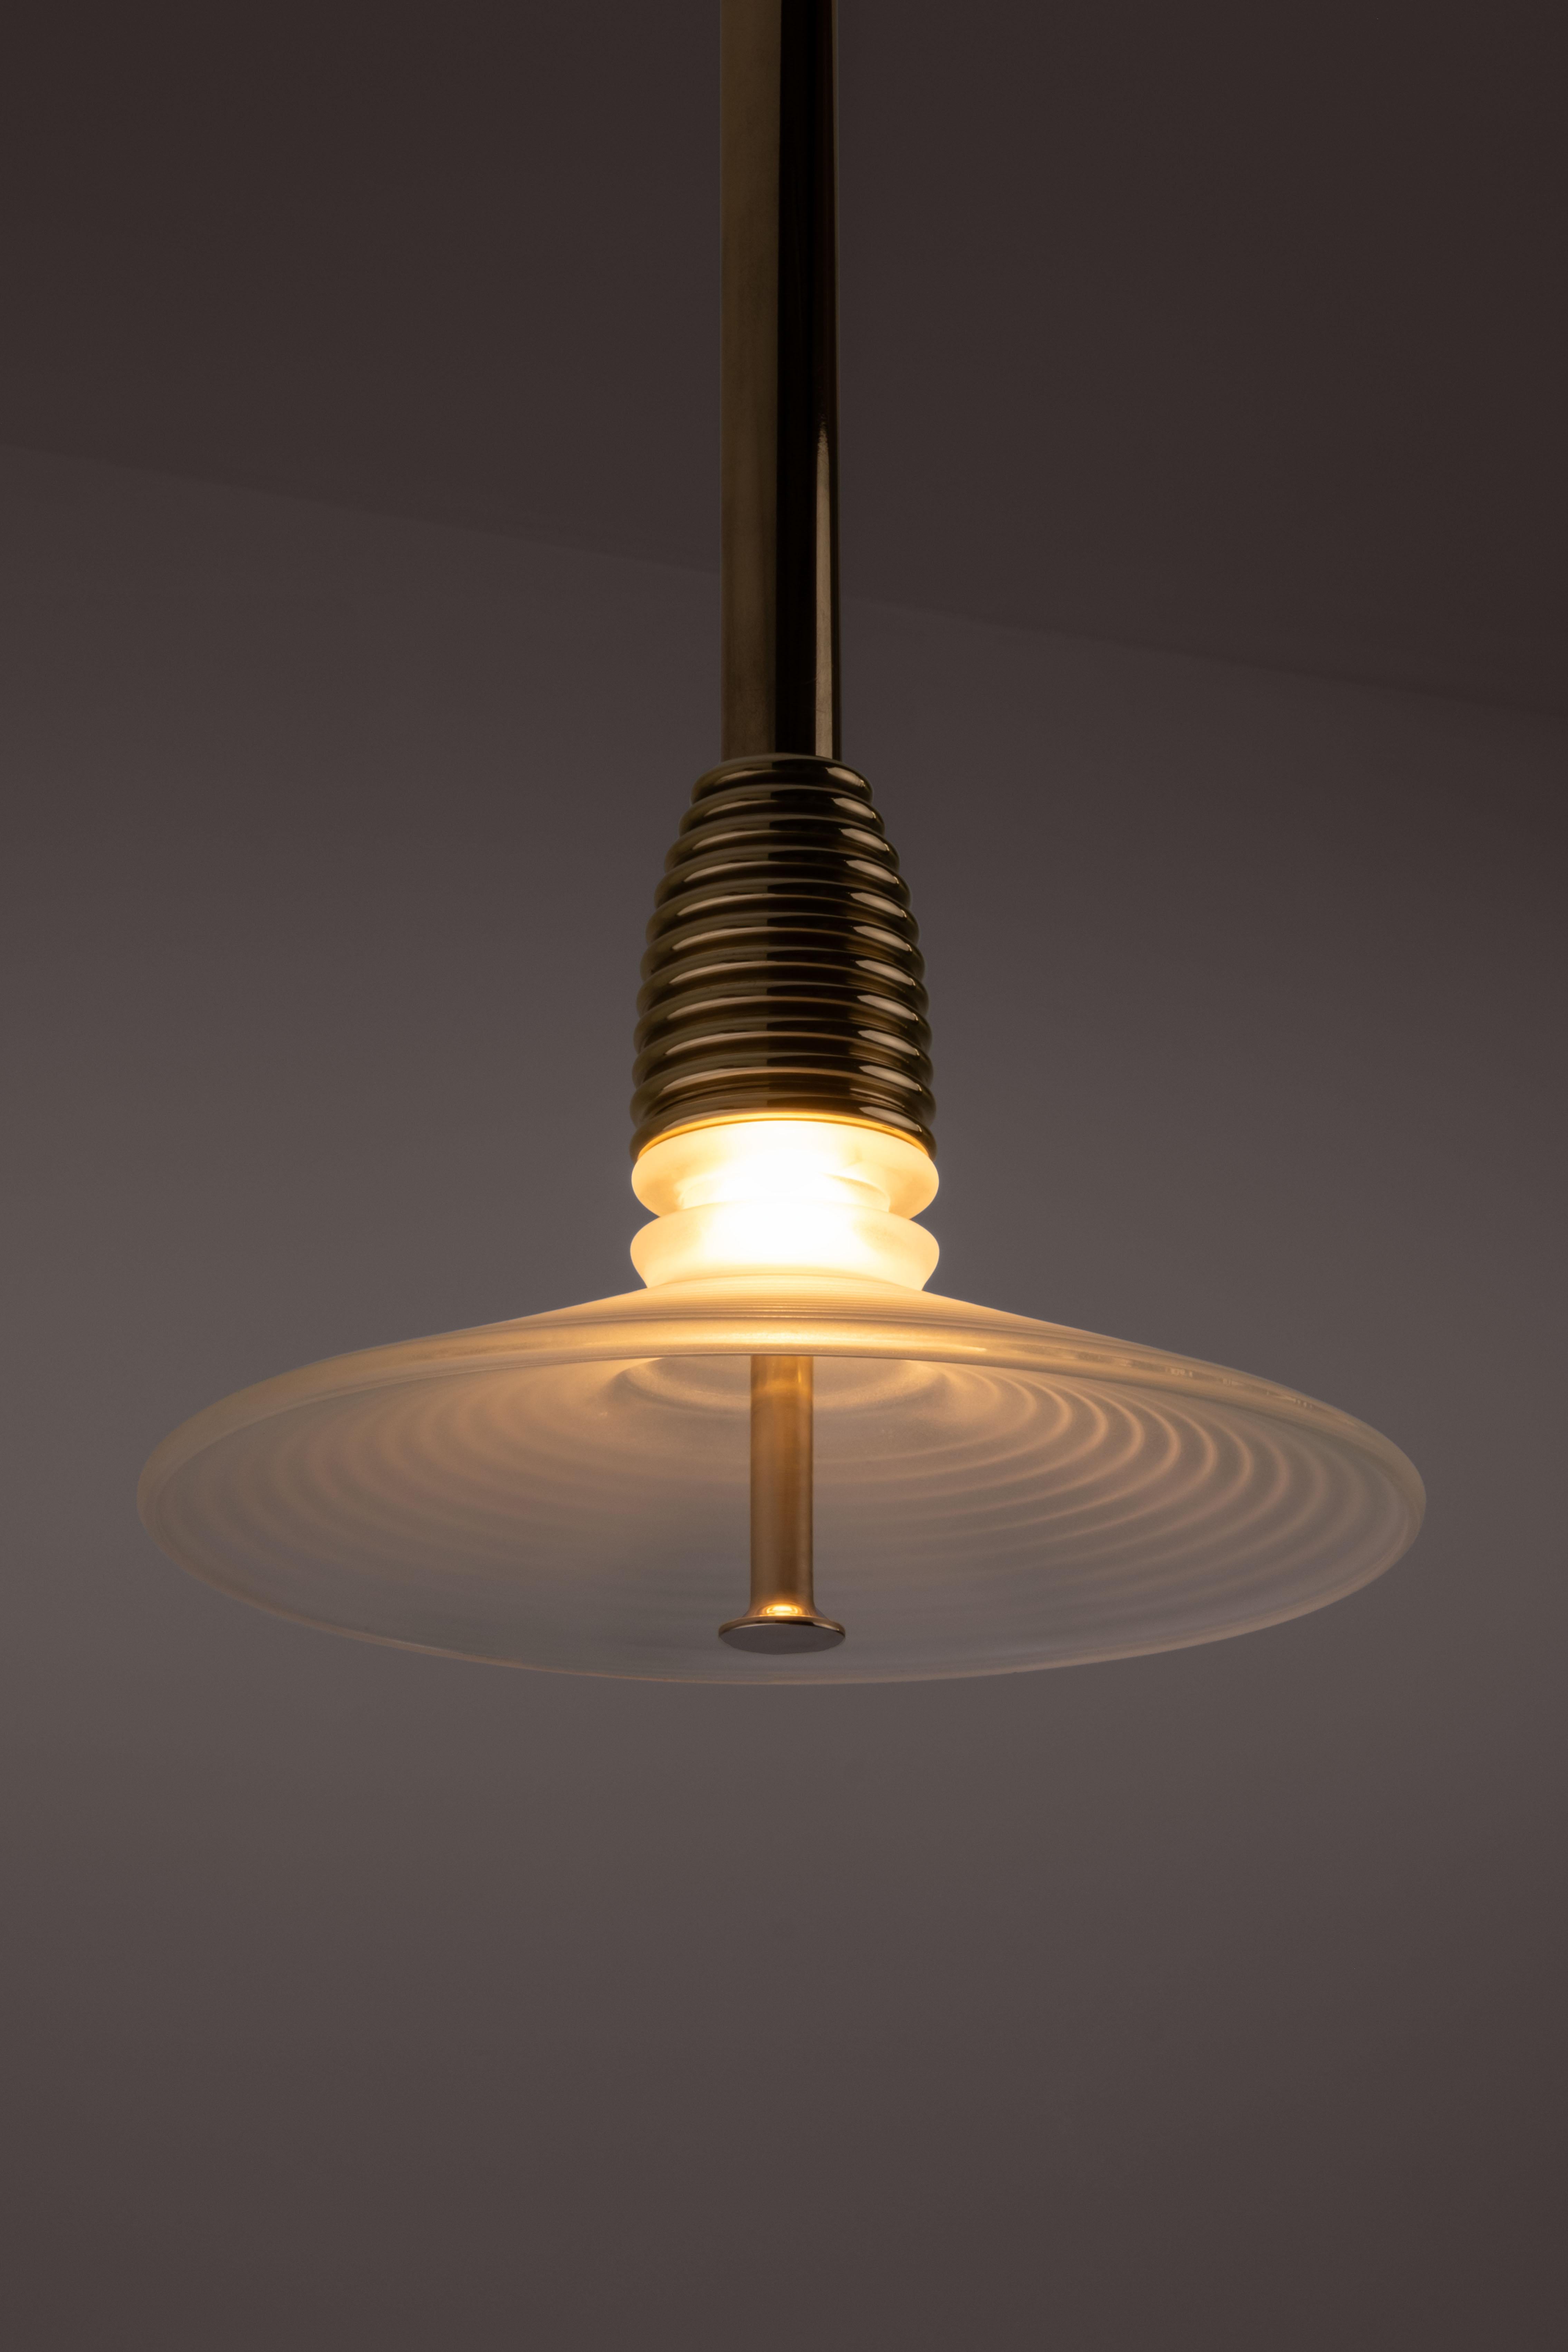 The Insulator 'B' Pendant in dark brass and frosted glass by NOVOCASTRIAN deco For Sale 2